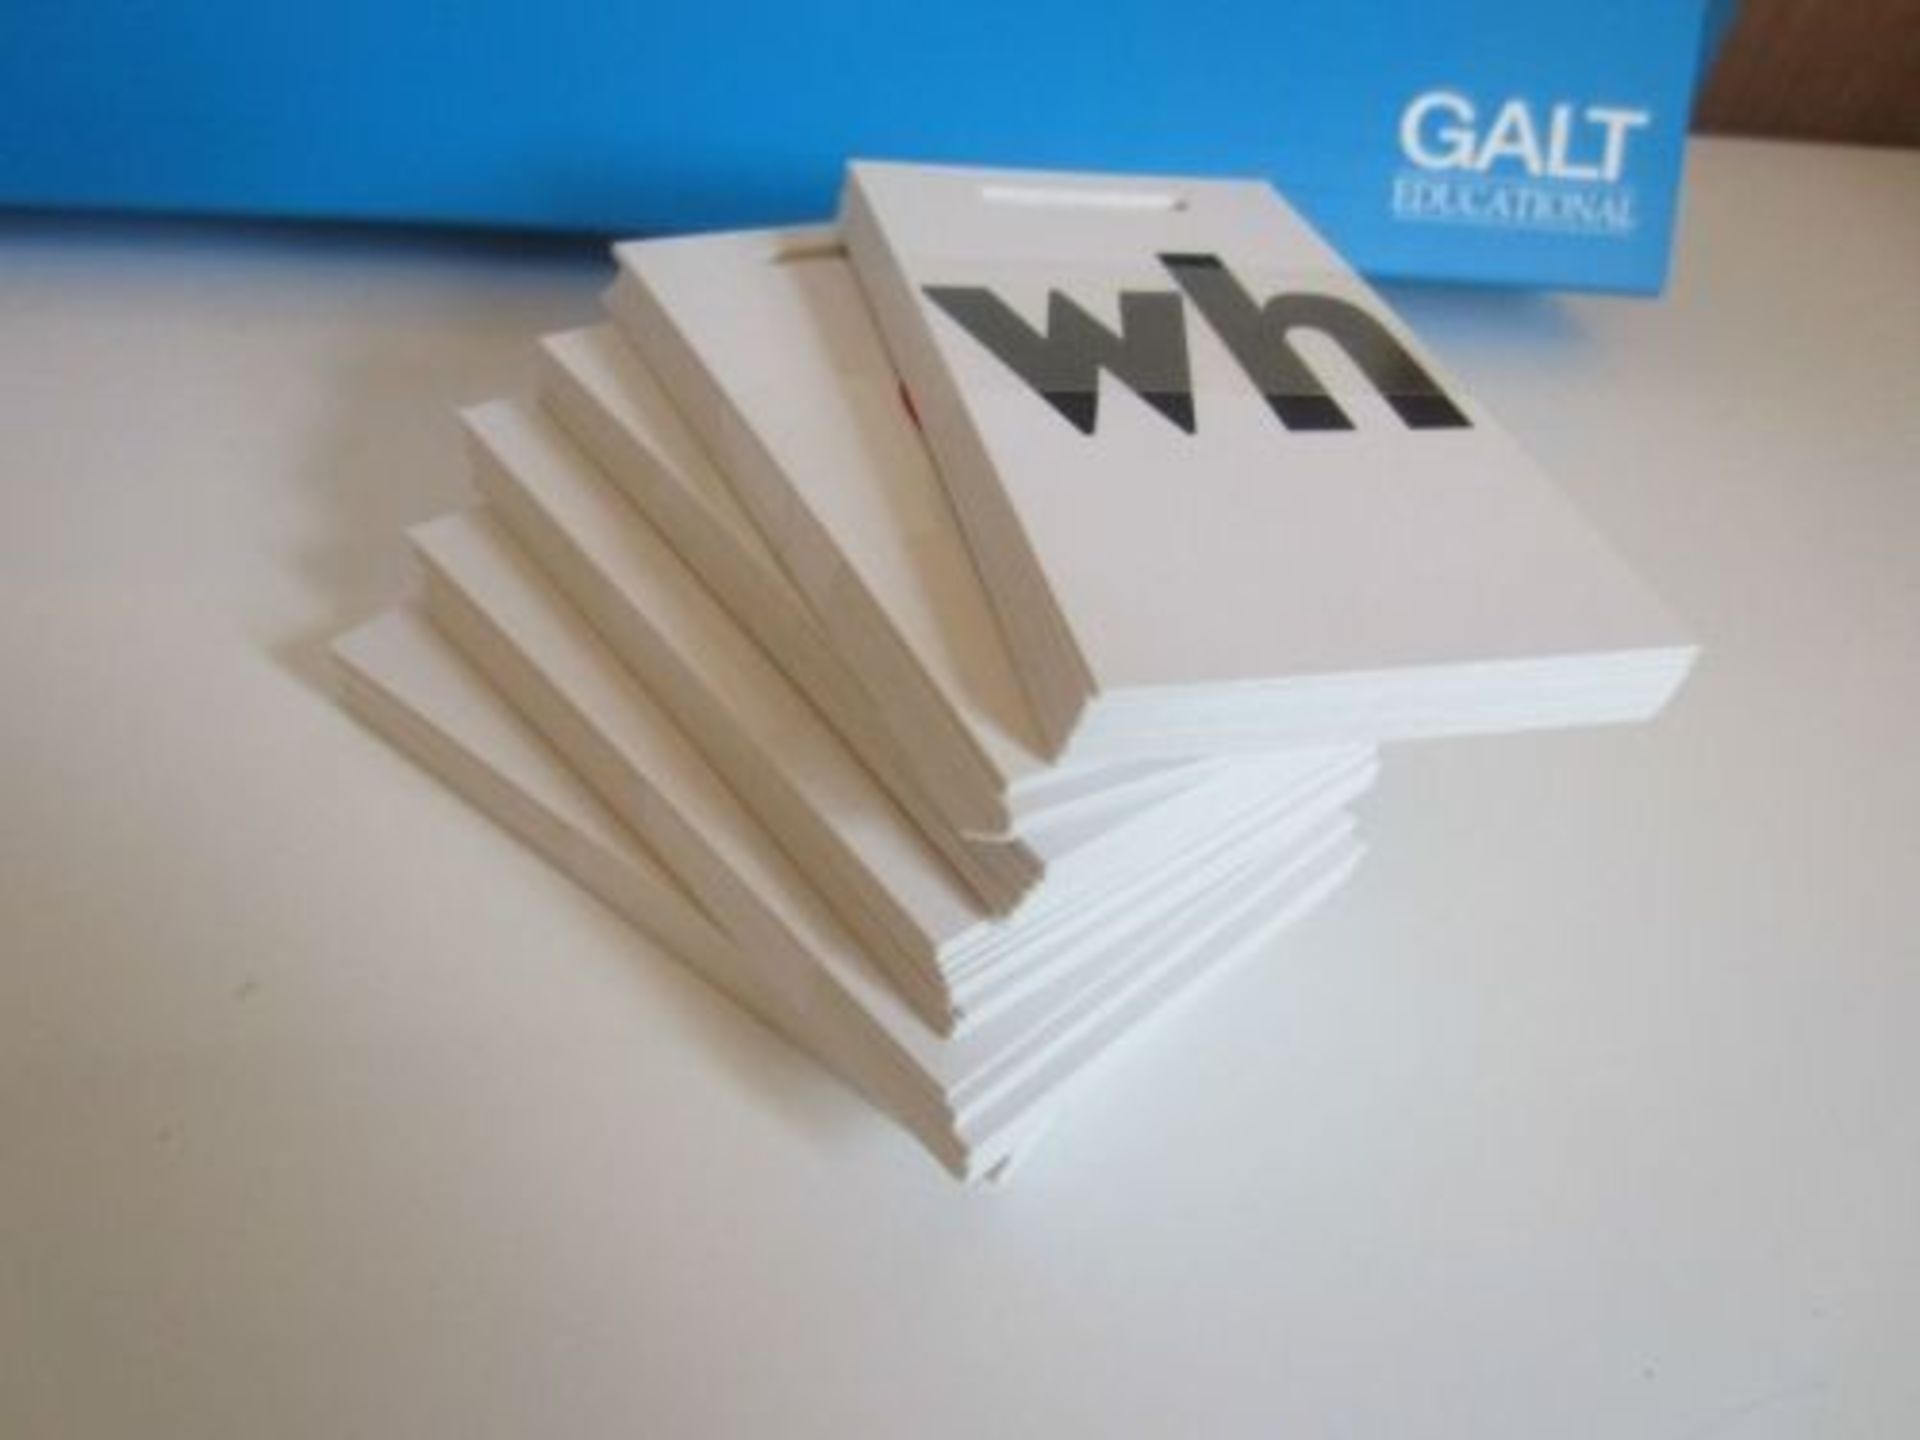 36 x Galt Educational WORDS FLIP CARDS With Stands - WORD BUILDER - For Educational Purposes - Ideal - Image 4 of 6